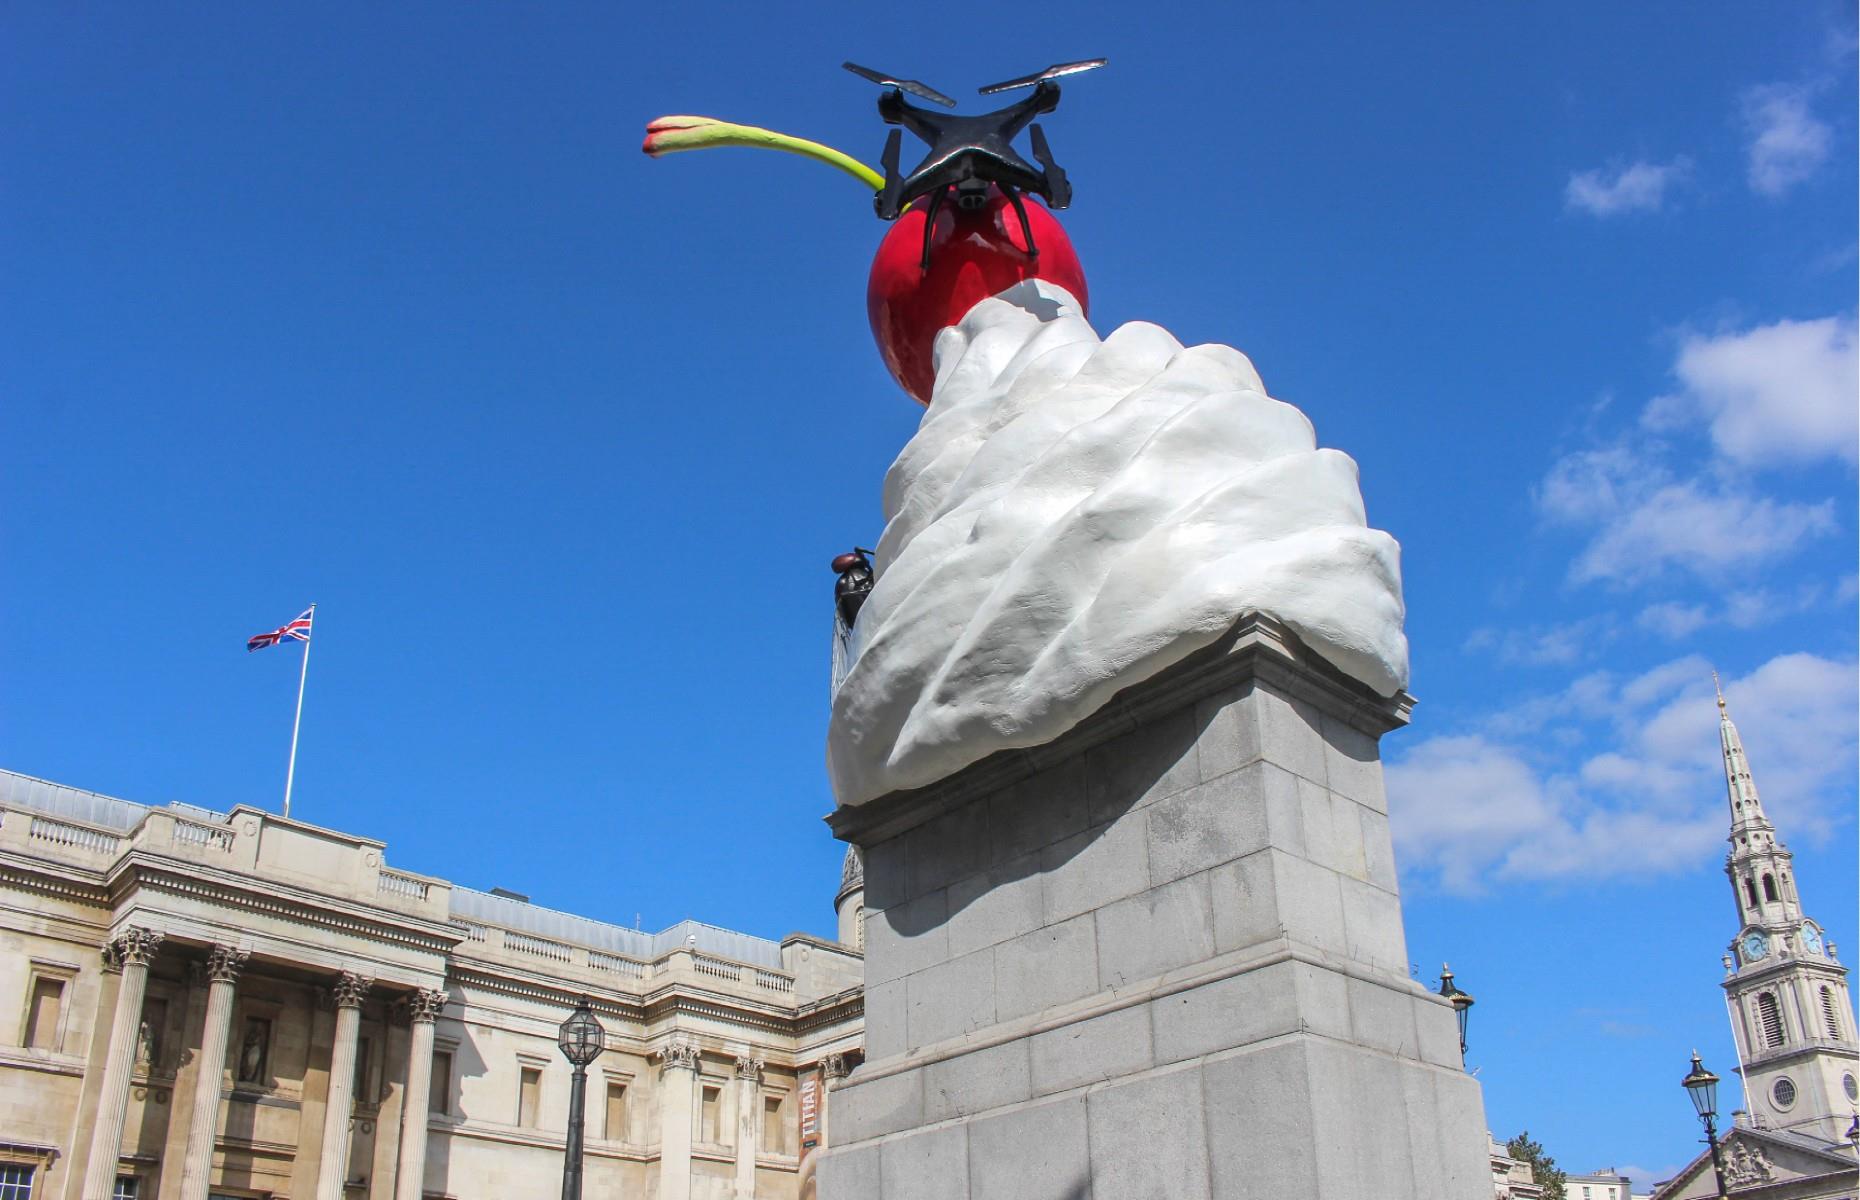 <p>Trafalgar Square's fourth plinth in London remained empty for 150 years – it was meant to feature a bronze statue of William IV but funds sadly ran out. The other three plinths depict statues of military officers Henry Havelock, Charles James Napier and King George IV. In 1998, the Royal Society of Arts launched the Fourth Plinth Project and the platform has hosted a range of contemporary artwork ever since and is now one of the most famous public art commissions in the world. The newest plinth design, Heather Phillipson’s The End, has been on display since July 2020.</p>